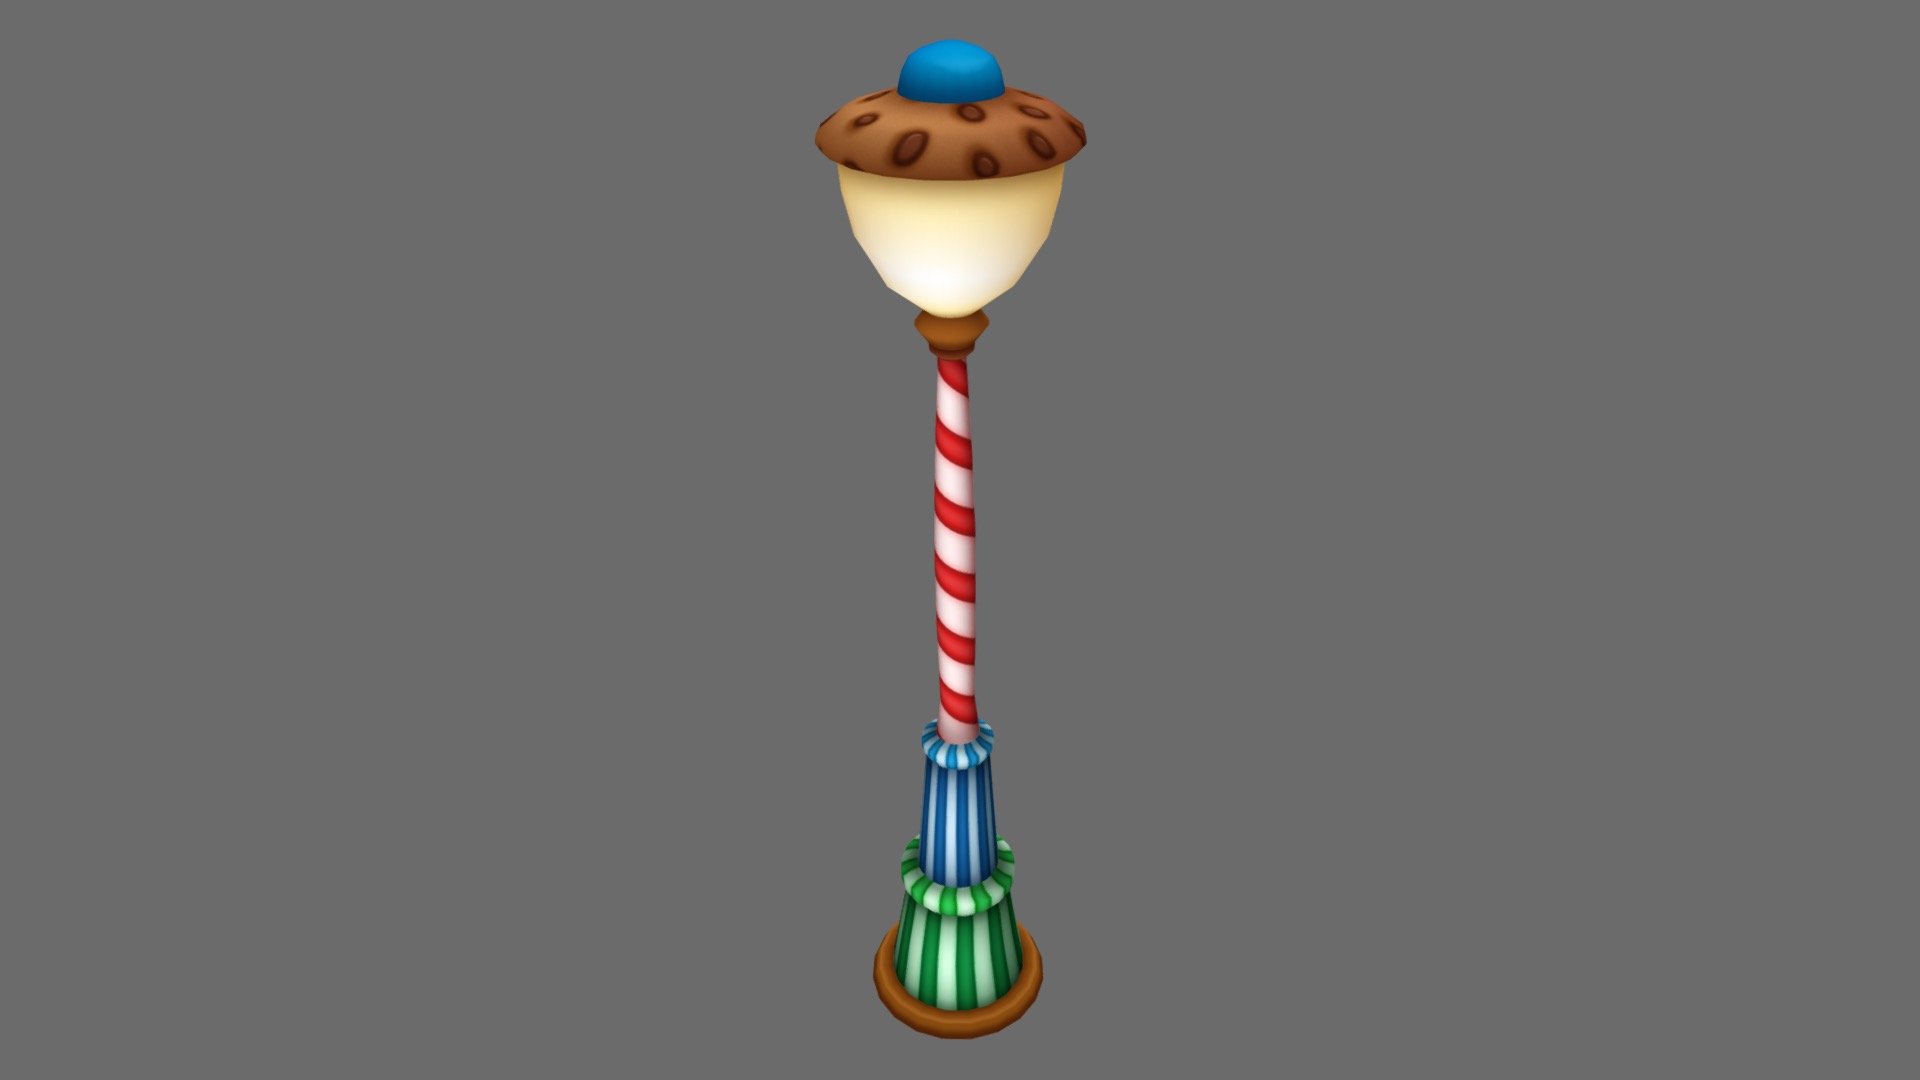 Candy Lamp:
Modeled in Autodesk Maya 2018 and textured in Adobe Photoshop CC by Daniel Borkow. Concept by Daniel Borkow.
Created in October of 2018 3d model